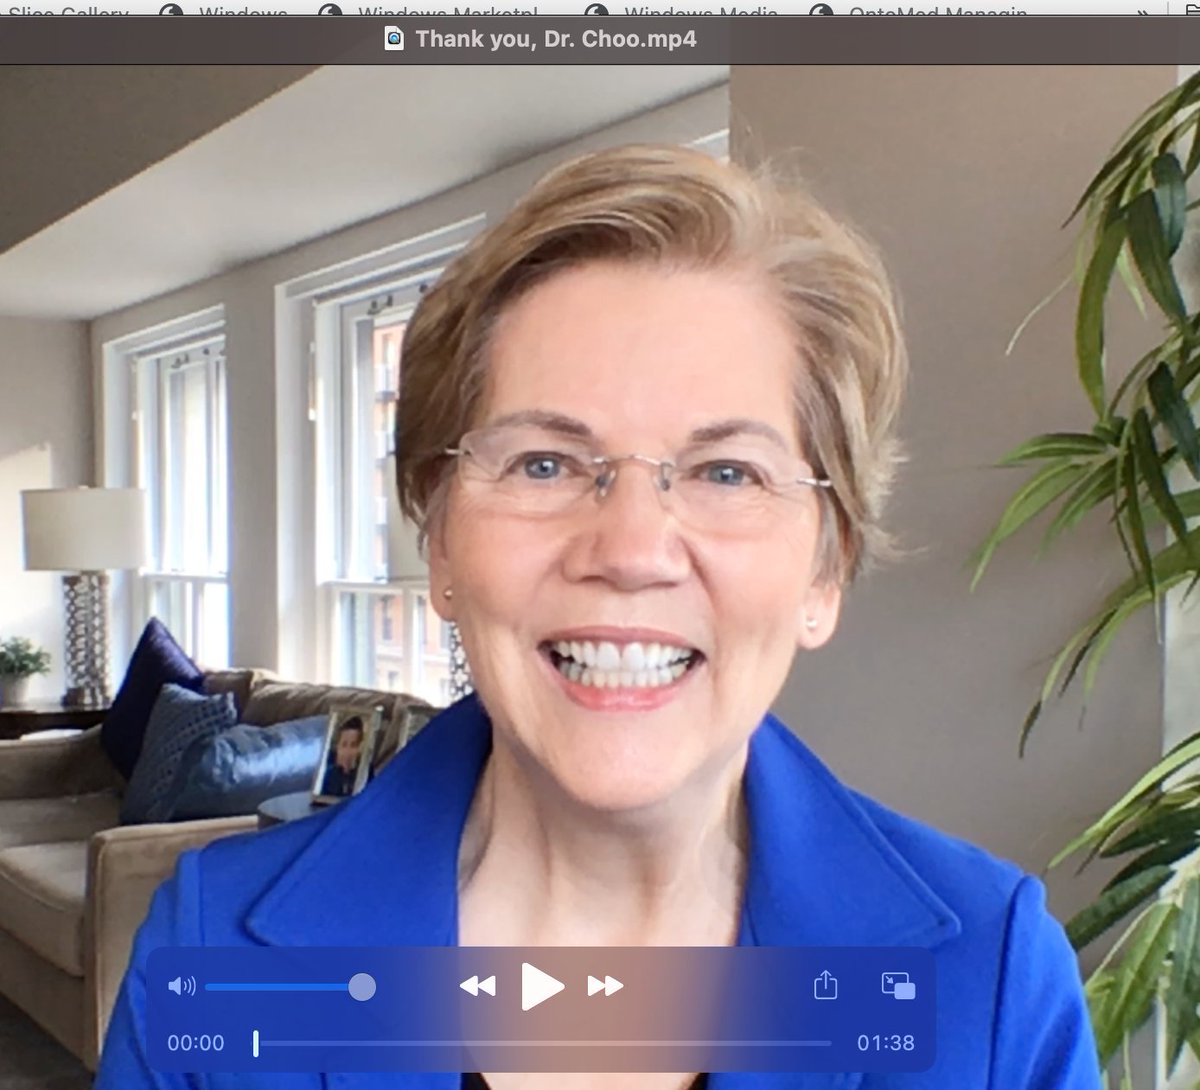 How I was beautifully emotionally ambushed by three medical students and  @ewarren this week: a story.